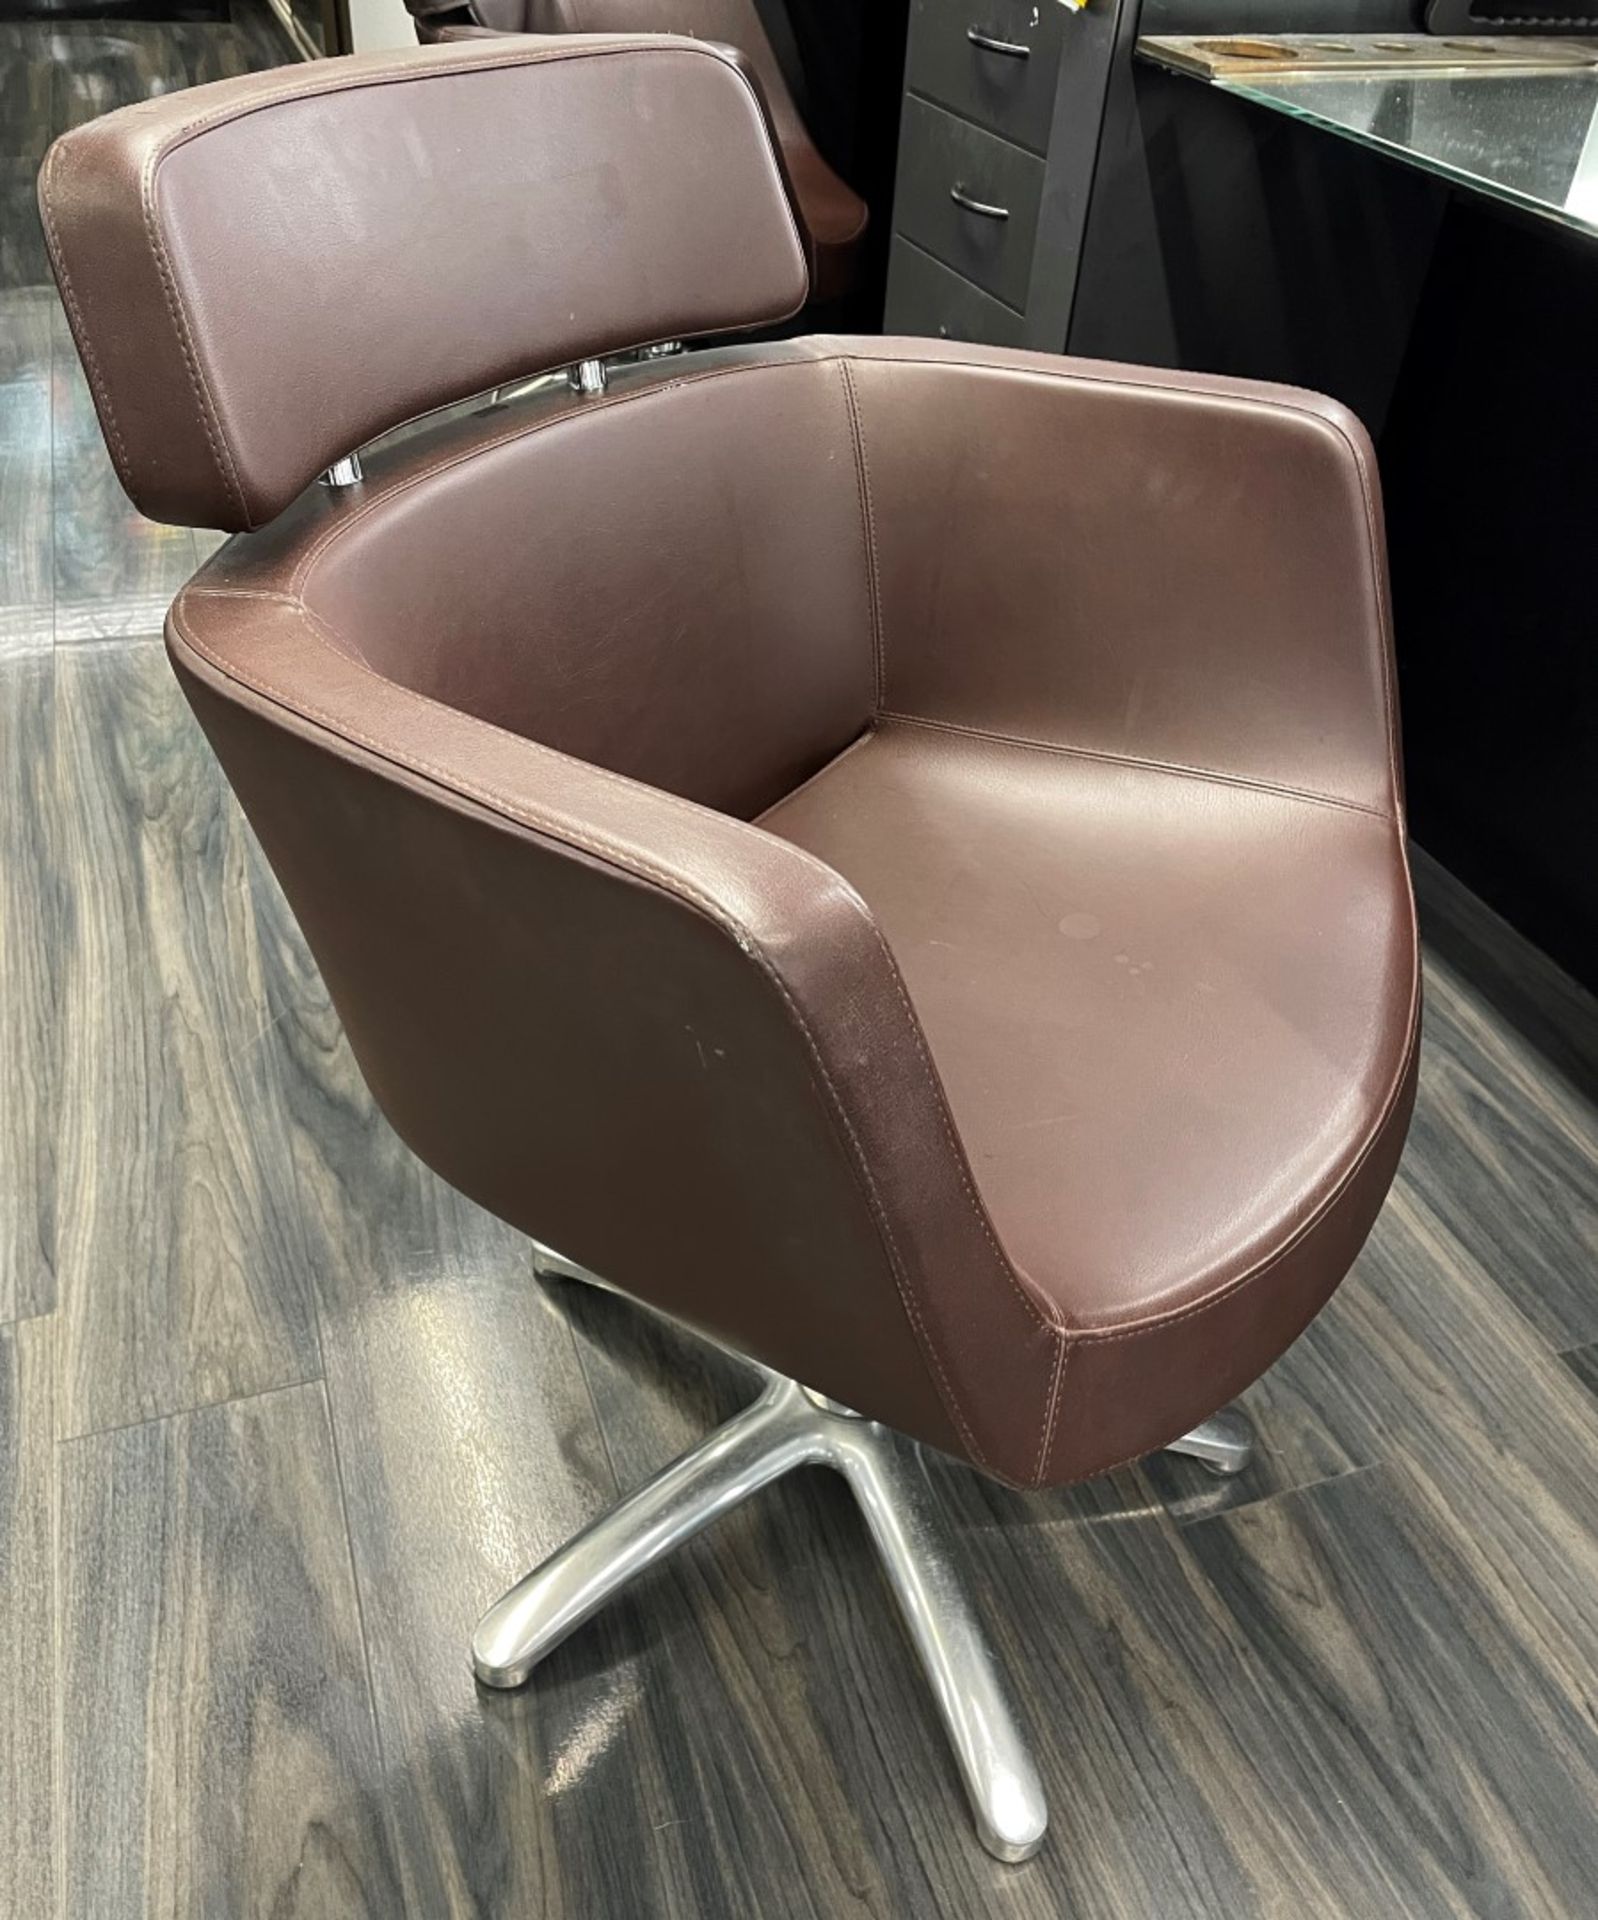 5 x Malet Branded Professional Hairdressing Salon Swivel Chairs In Brown - Includes 4 x Foot Rests